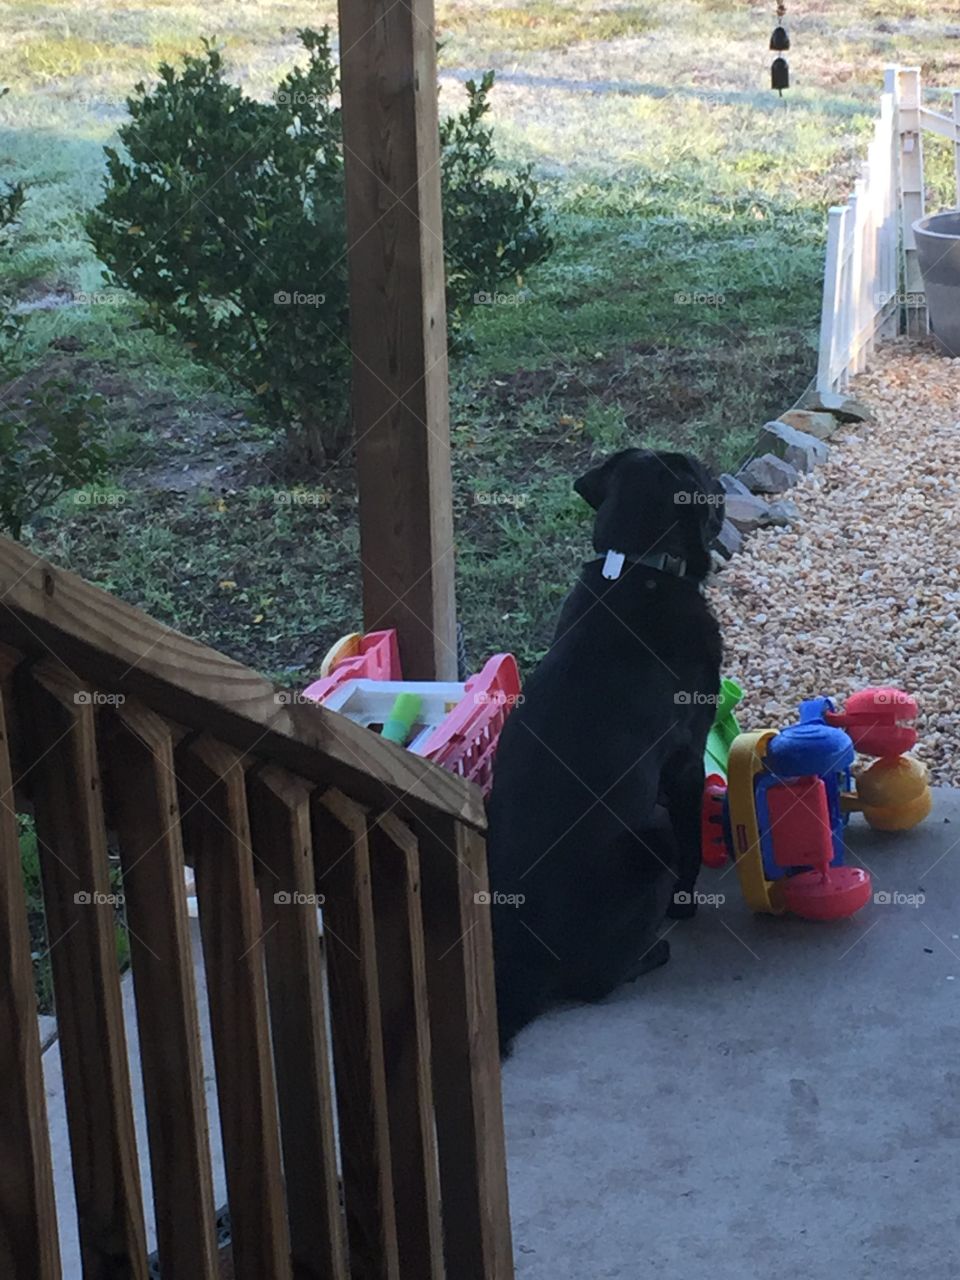 I will guard the kids toys